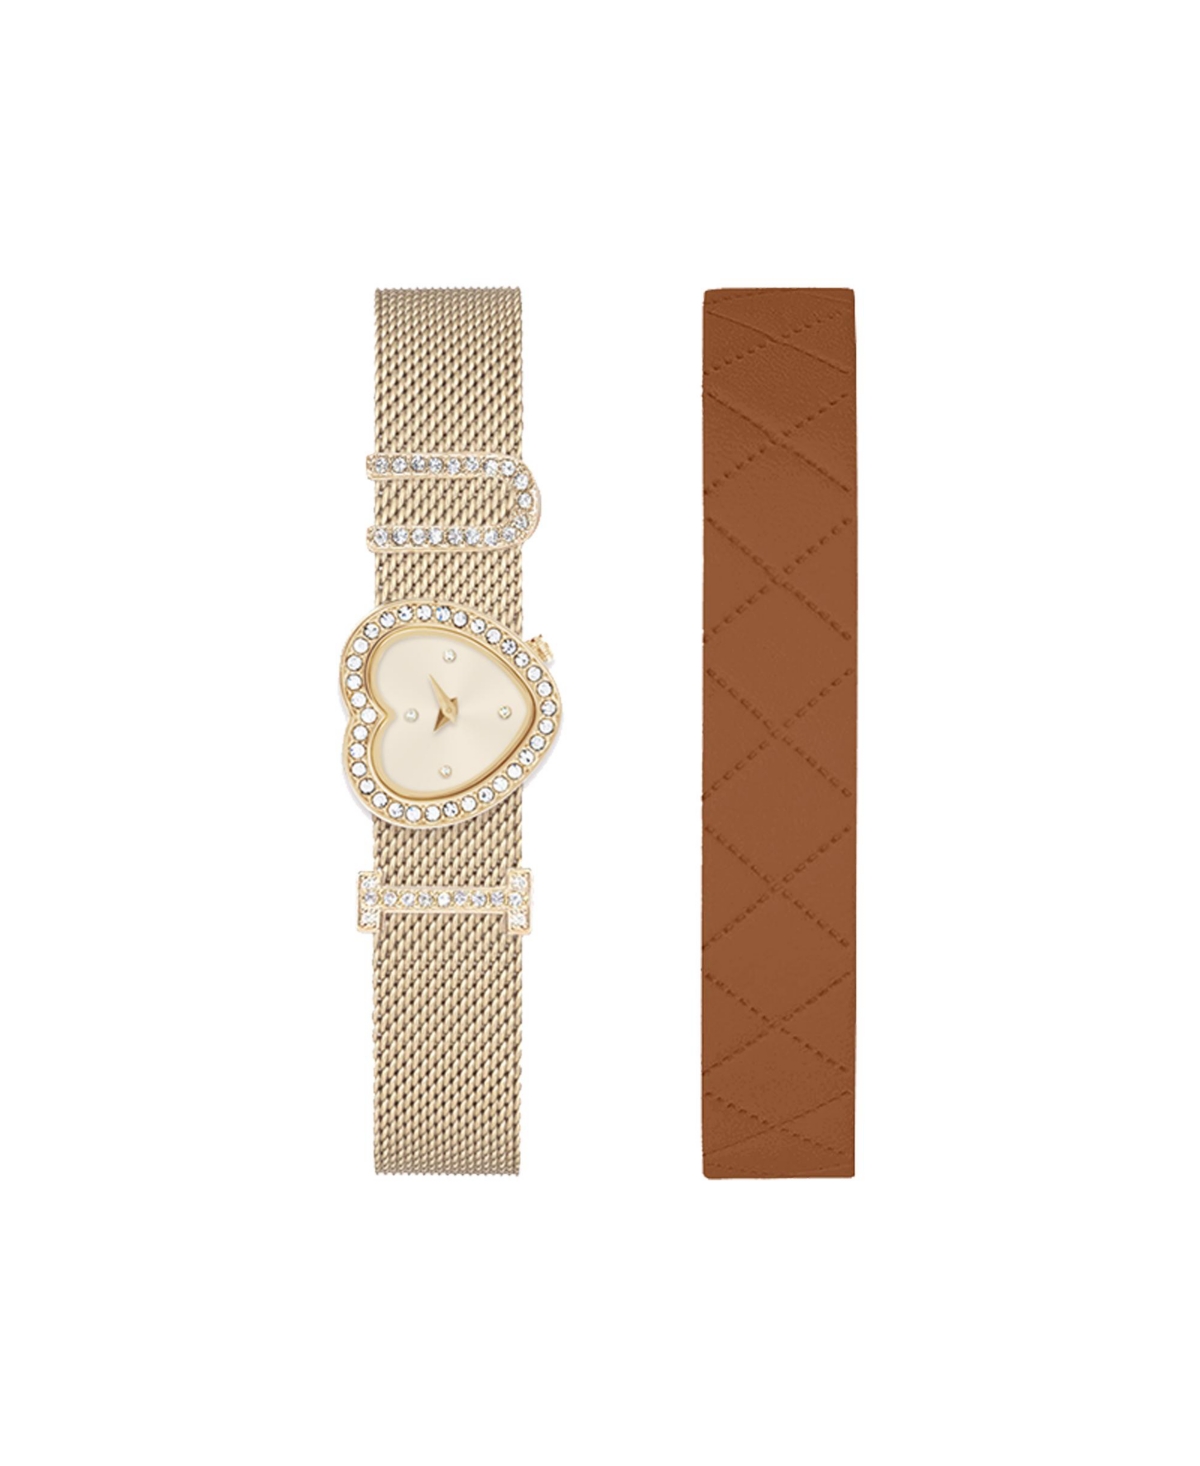 Women's Shiny Gold-Tone Bracelet Analog Watch 21mm with Interchangeable Leather Strap - Gold-tone